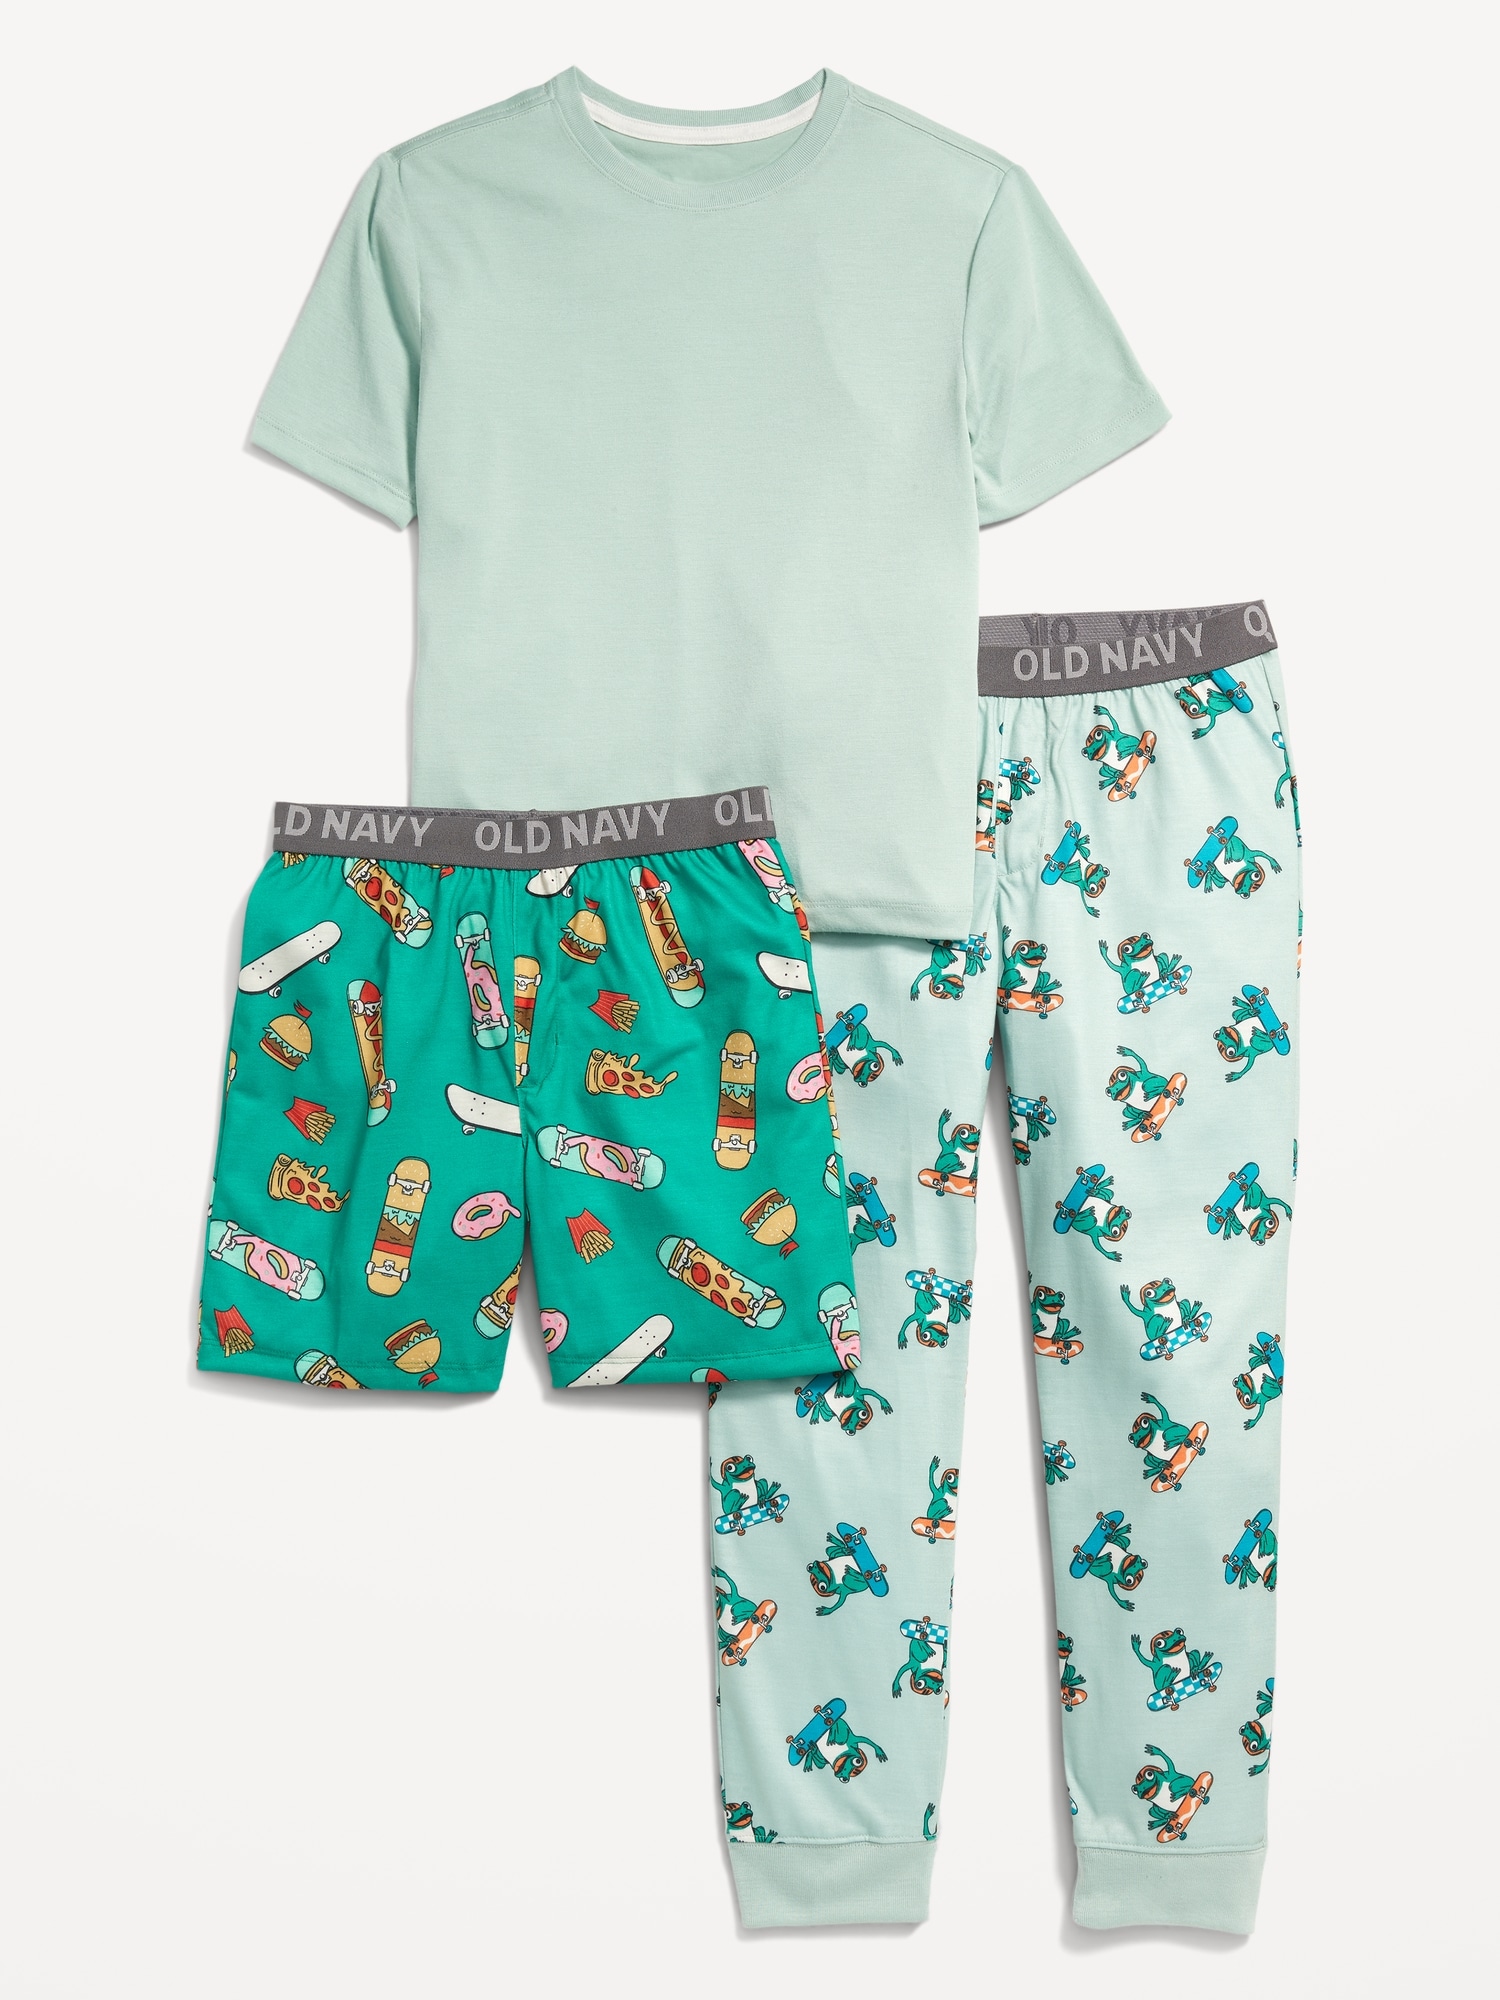 Old Navy 3-Piece Printed Pajama Set for Boys green. 1